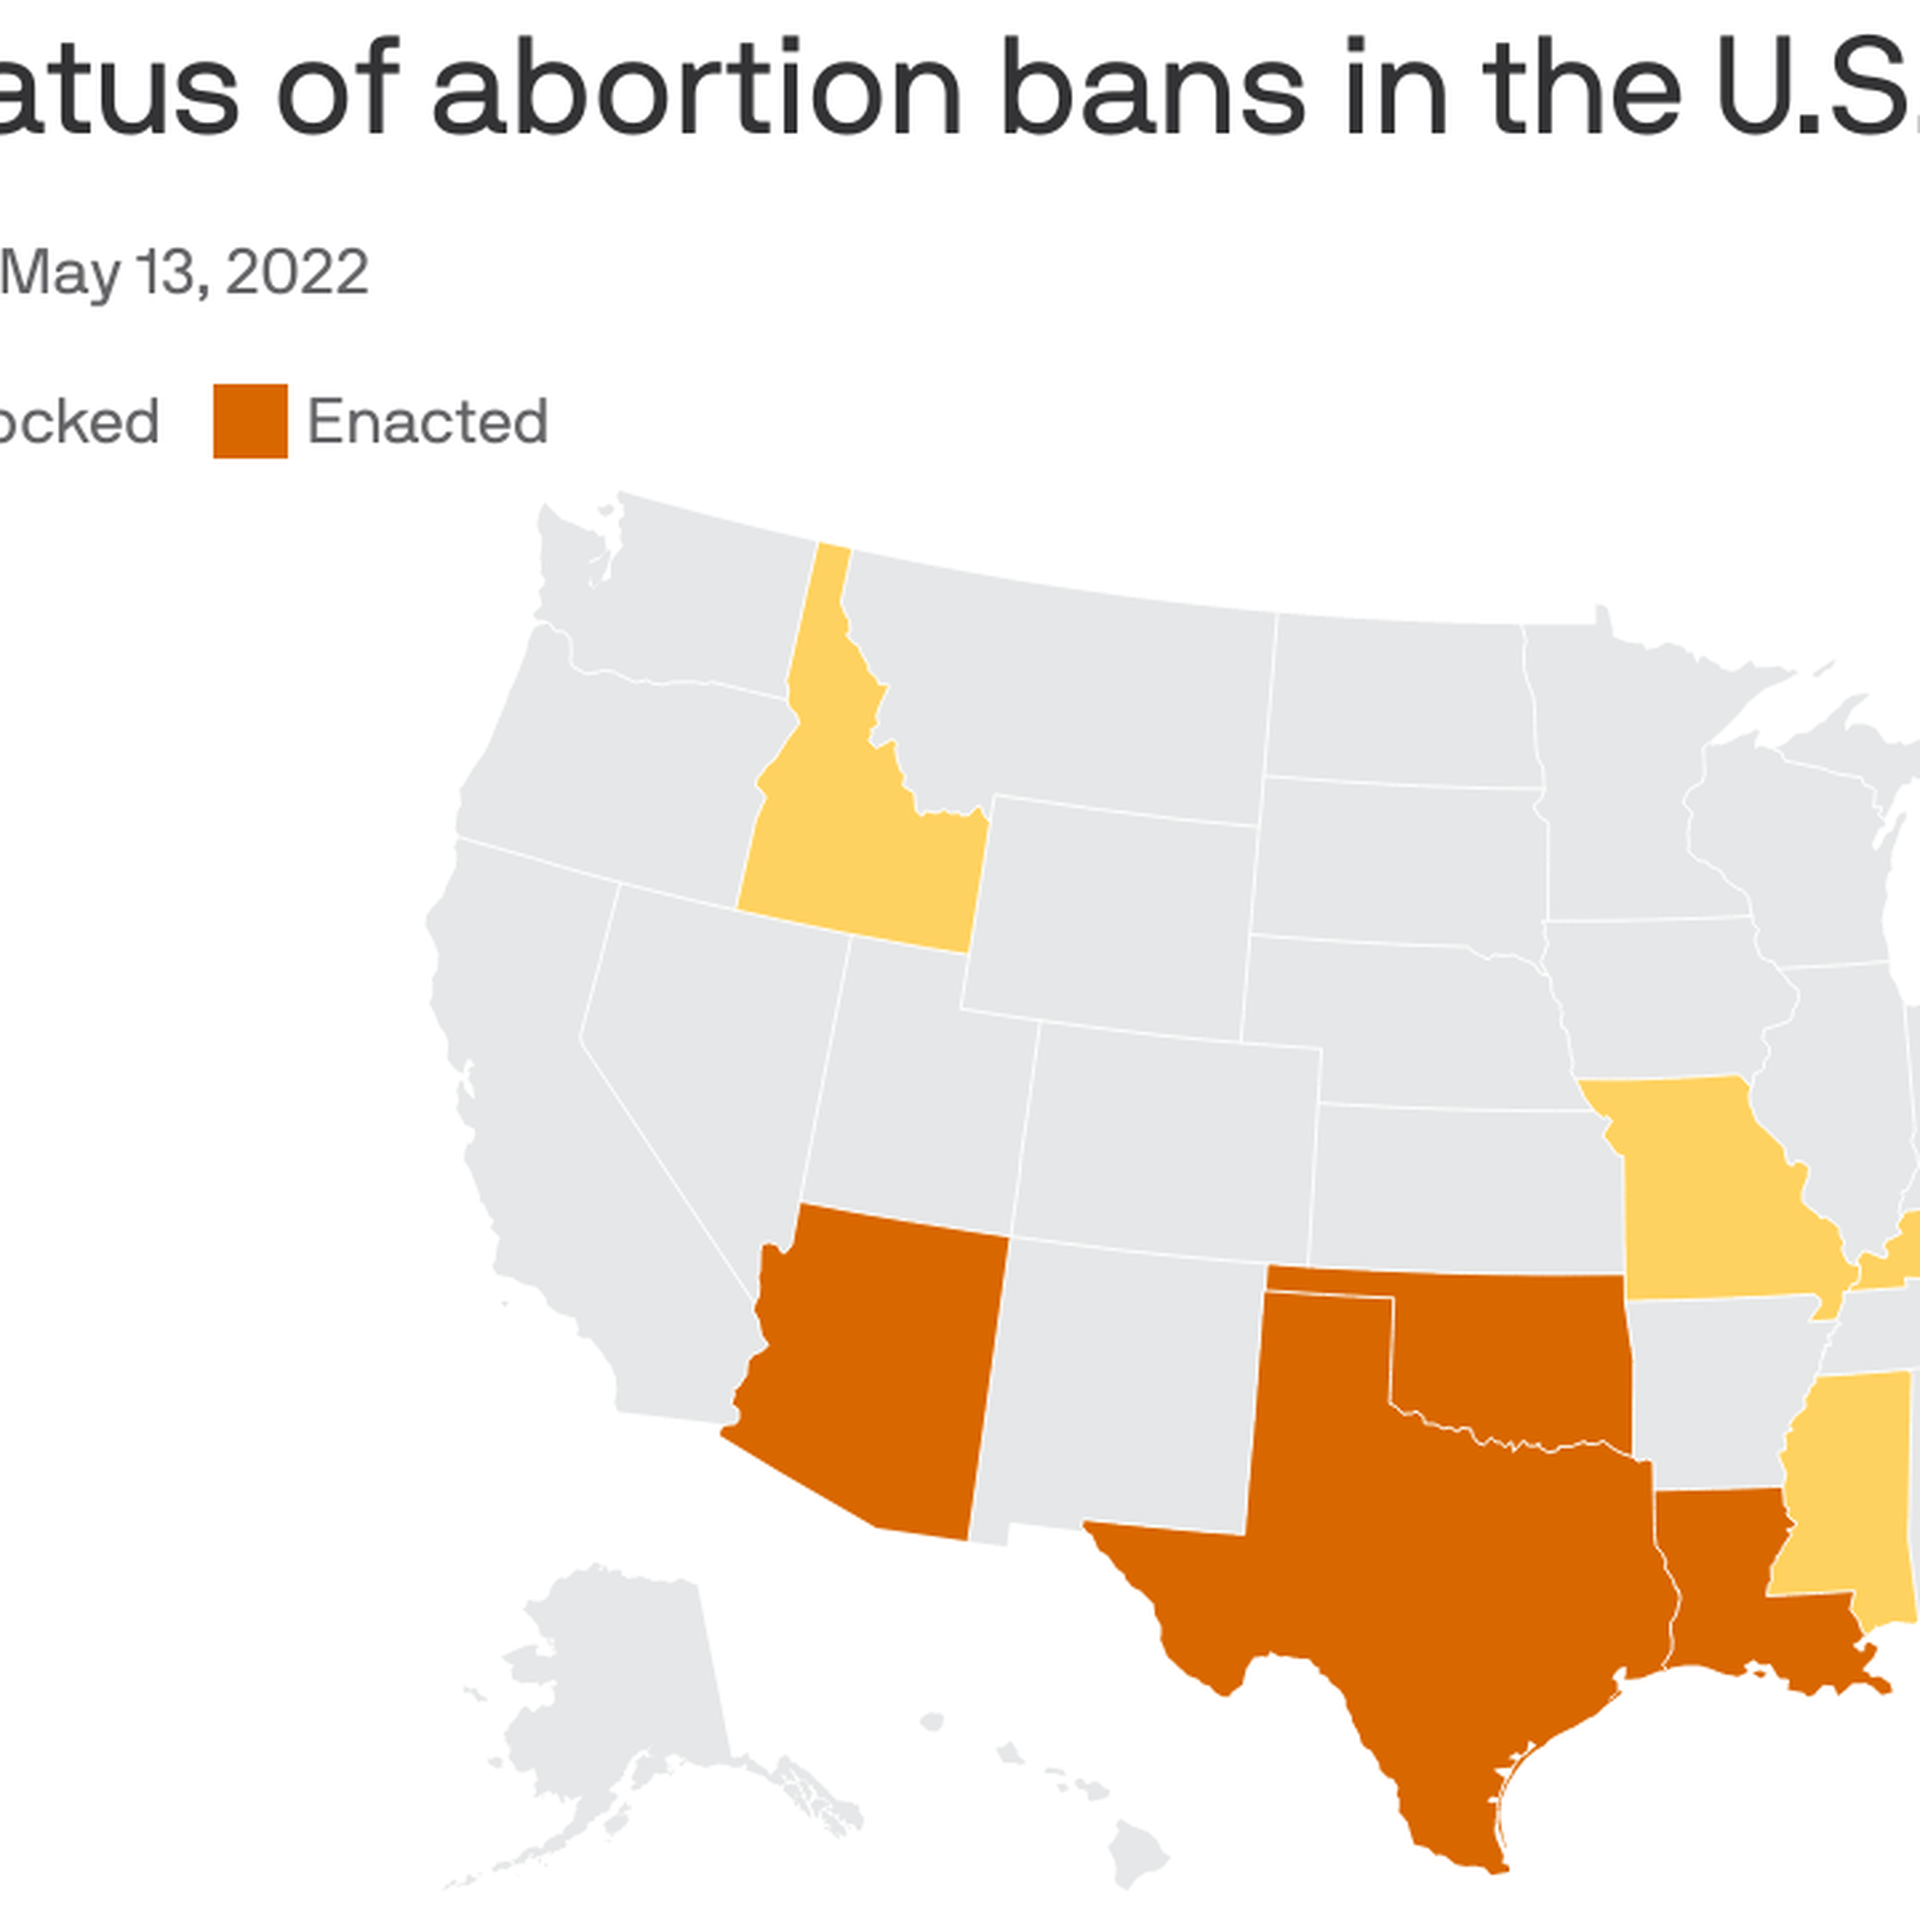 Map showing which states have enacted abortion bans, with some being blocked by courts.